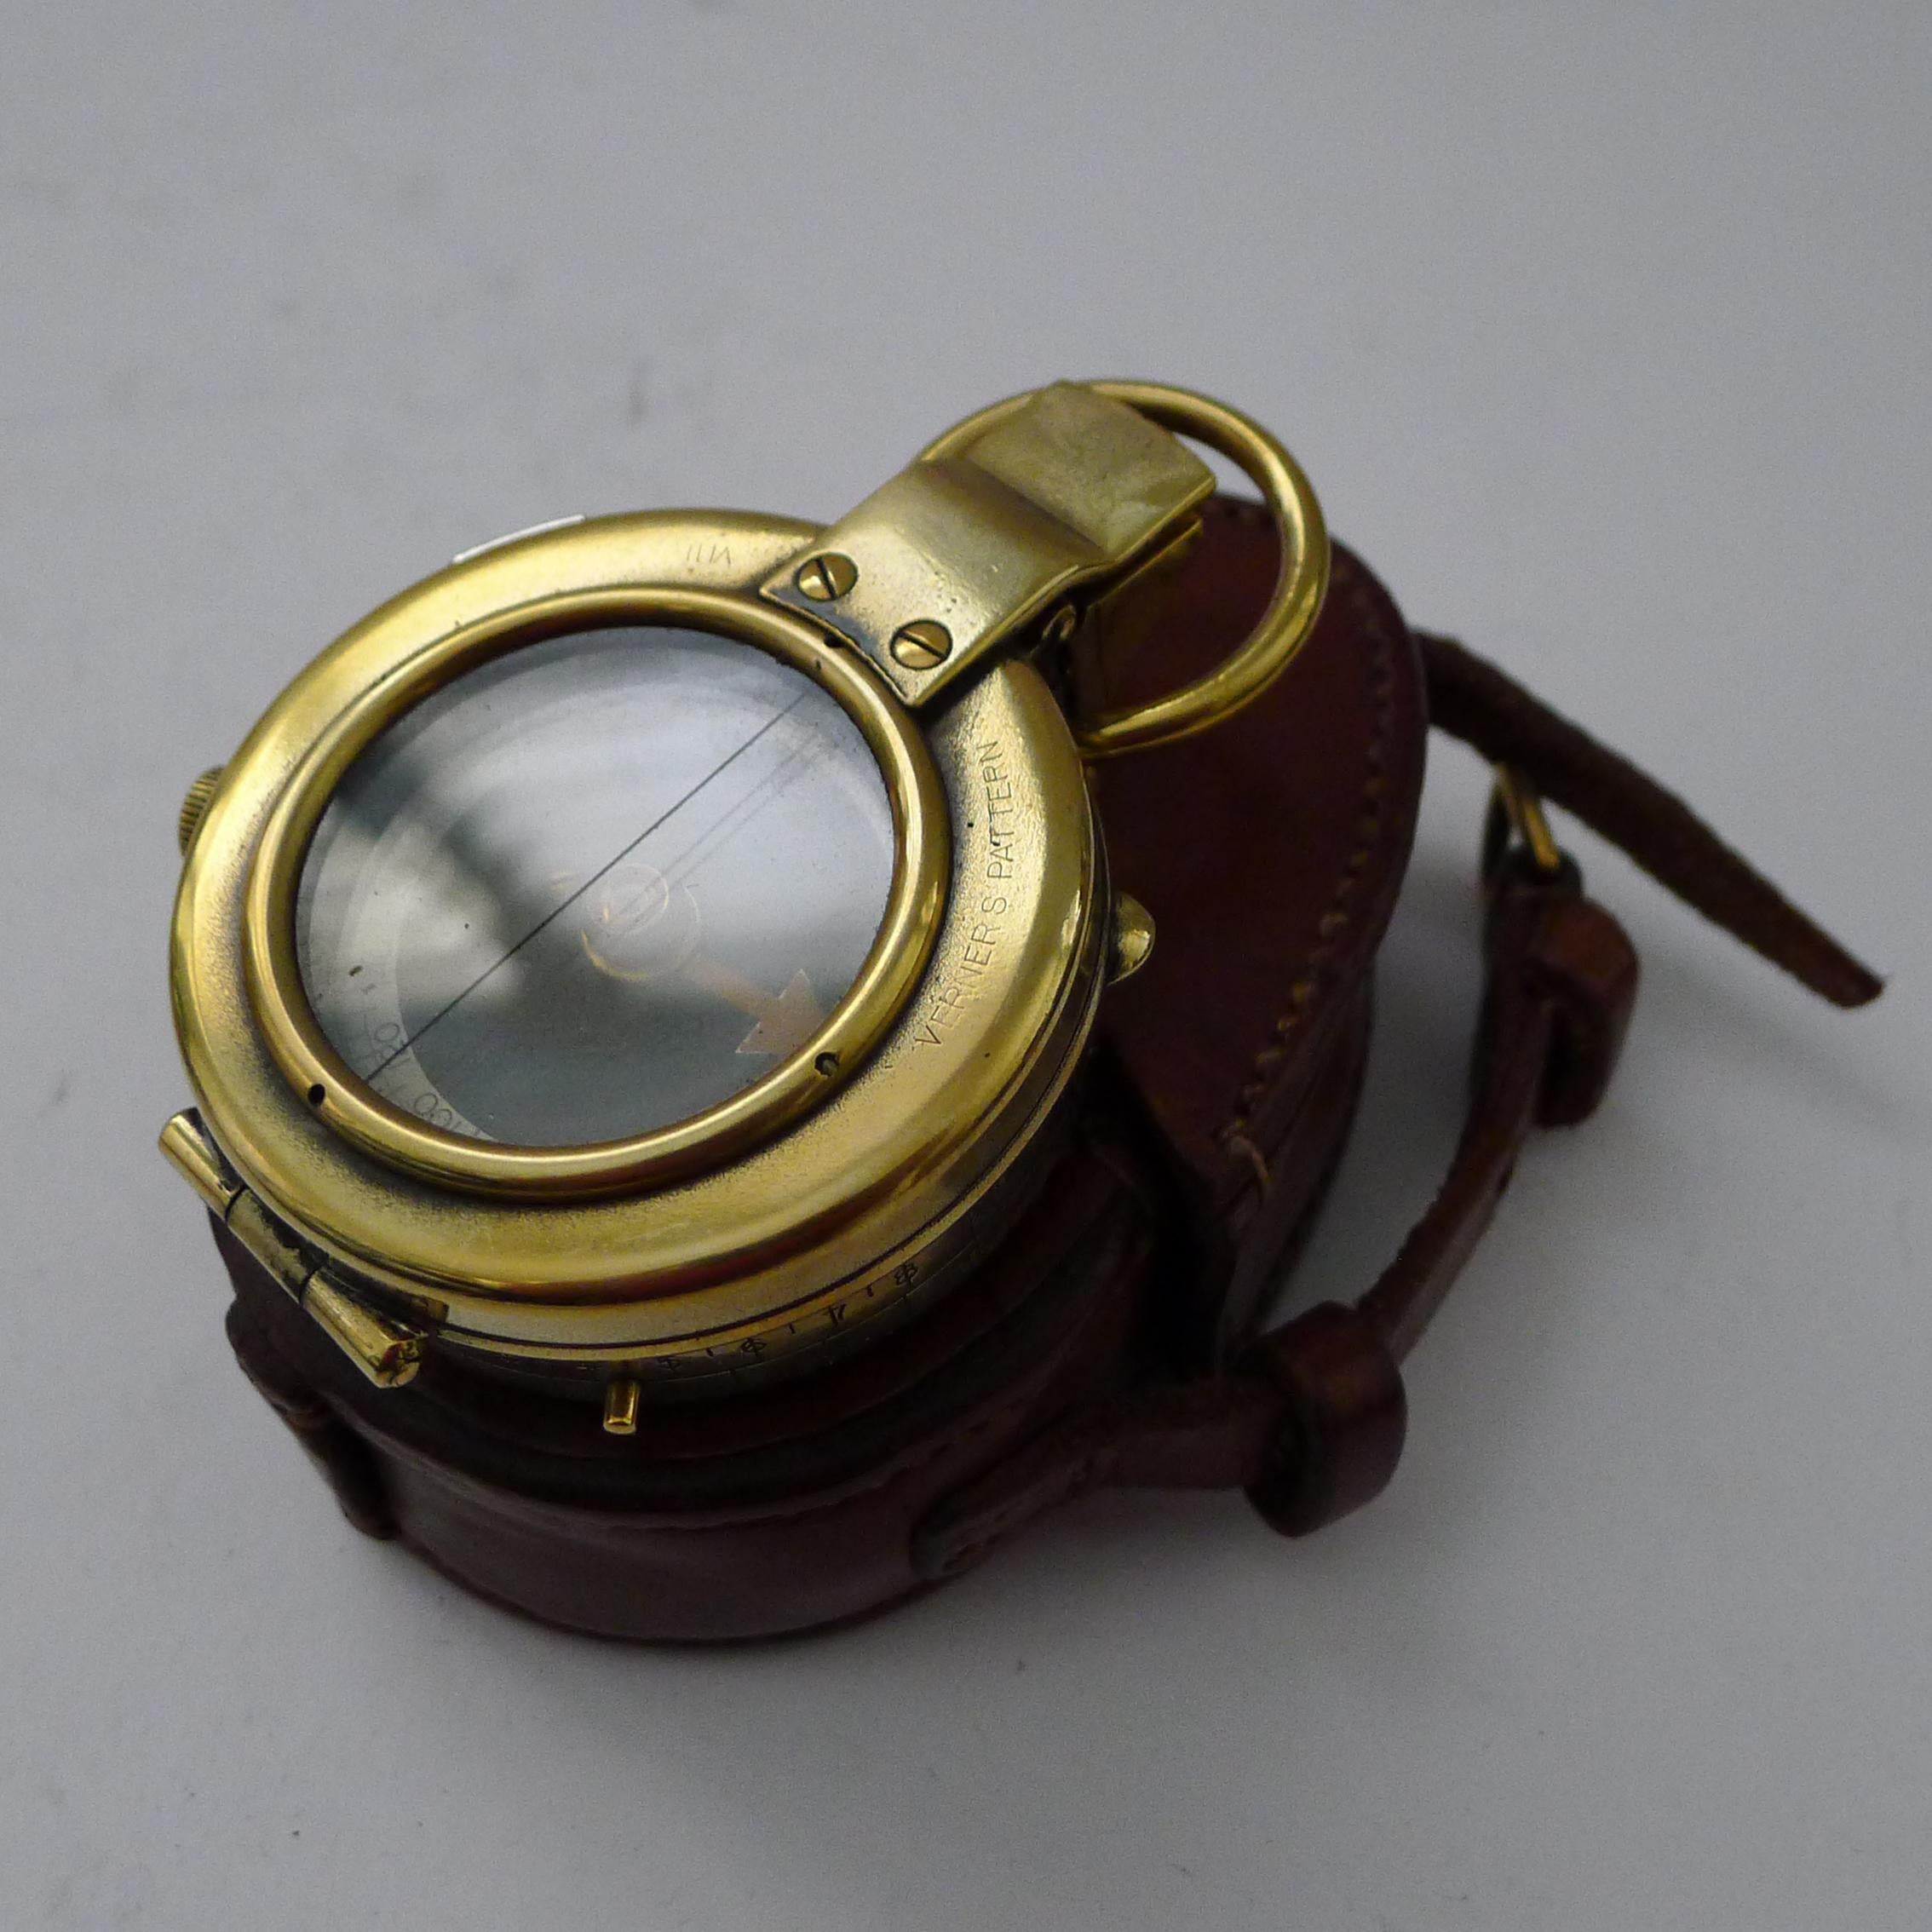 Brass WW1 1918 British Army Officer's Compass - Verner's Patent MK VII by French Ltd. For Sale